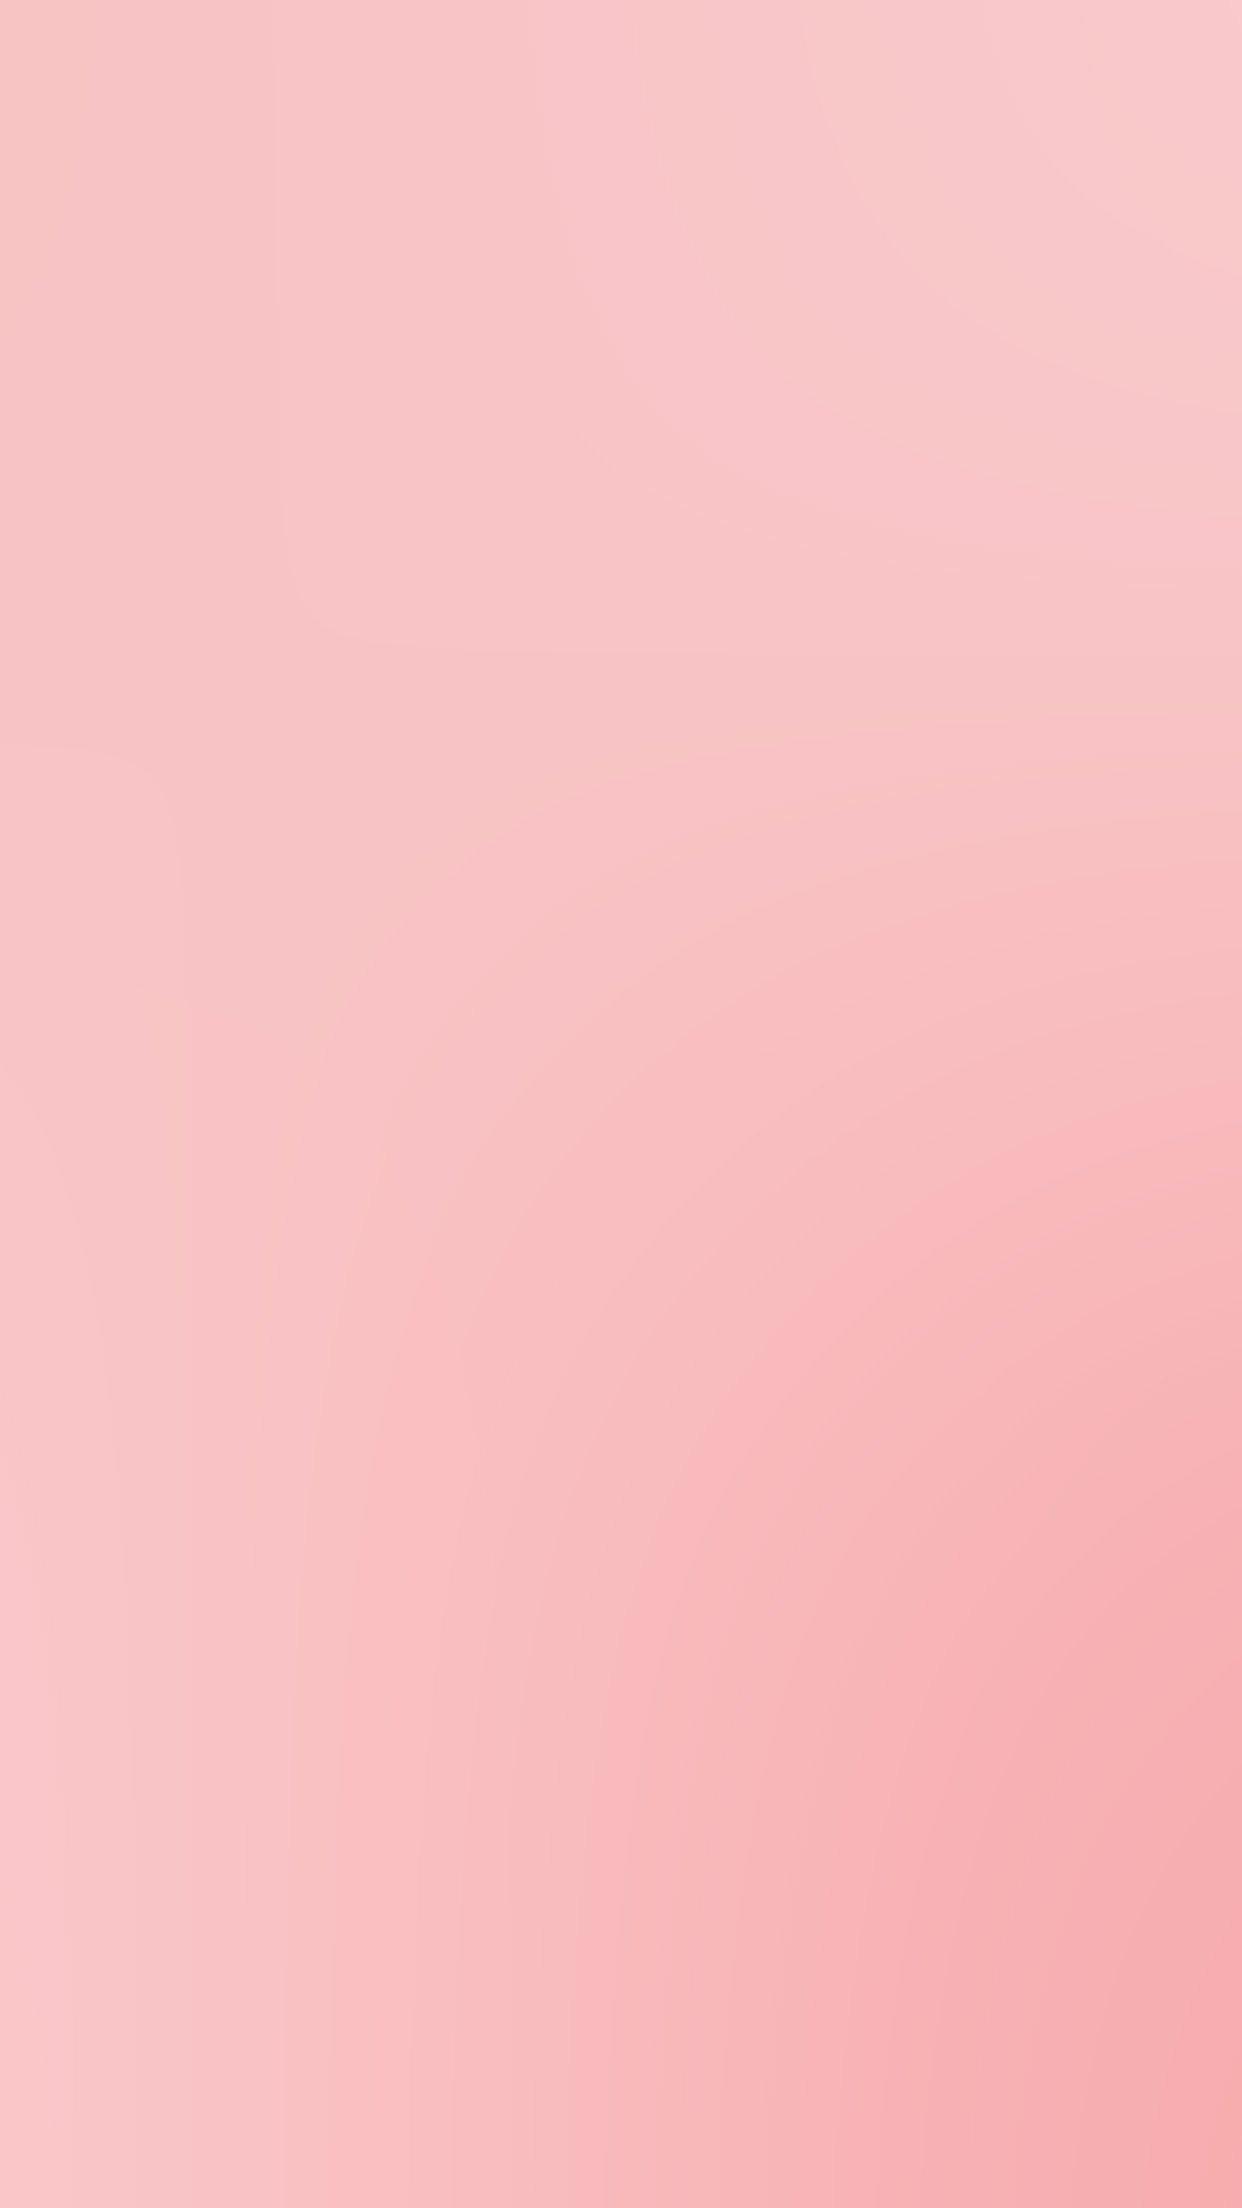 10 Outstanding baby pink aesthetic wallpaper heart You Can Download It ...